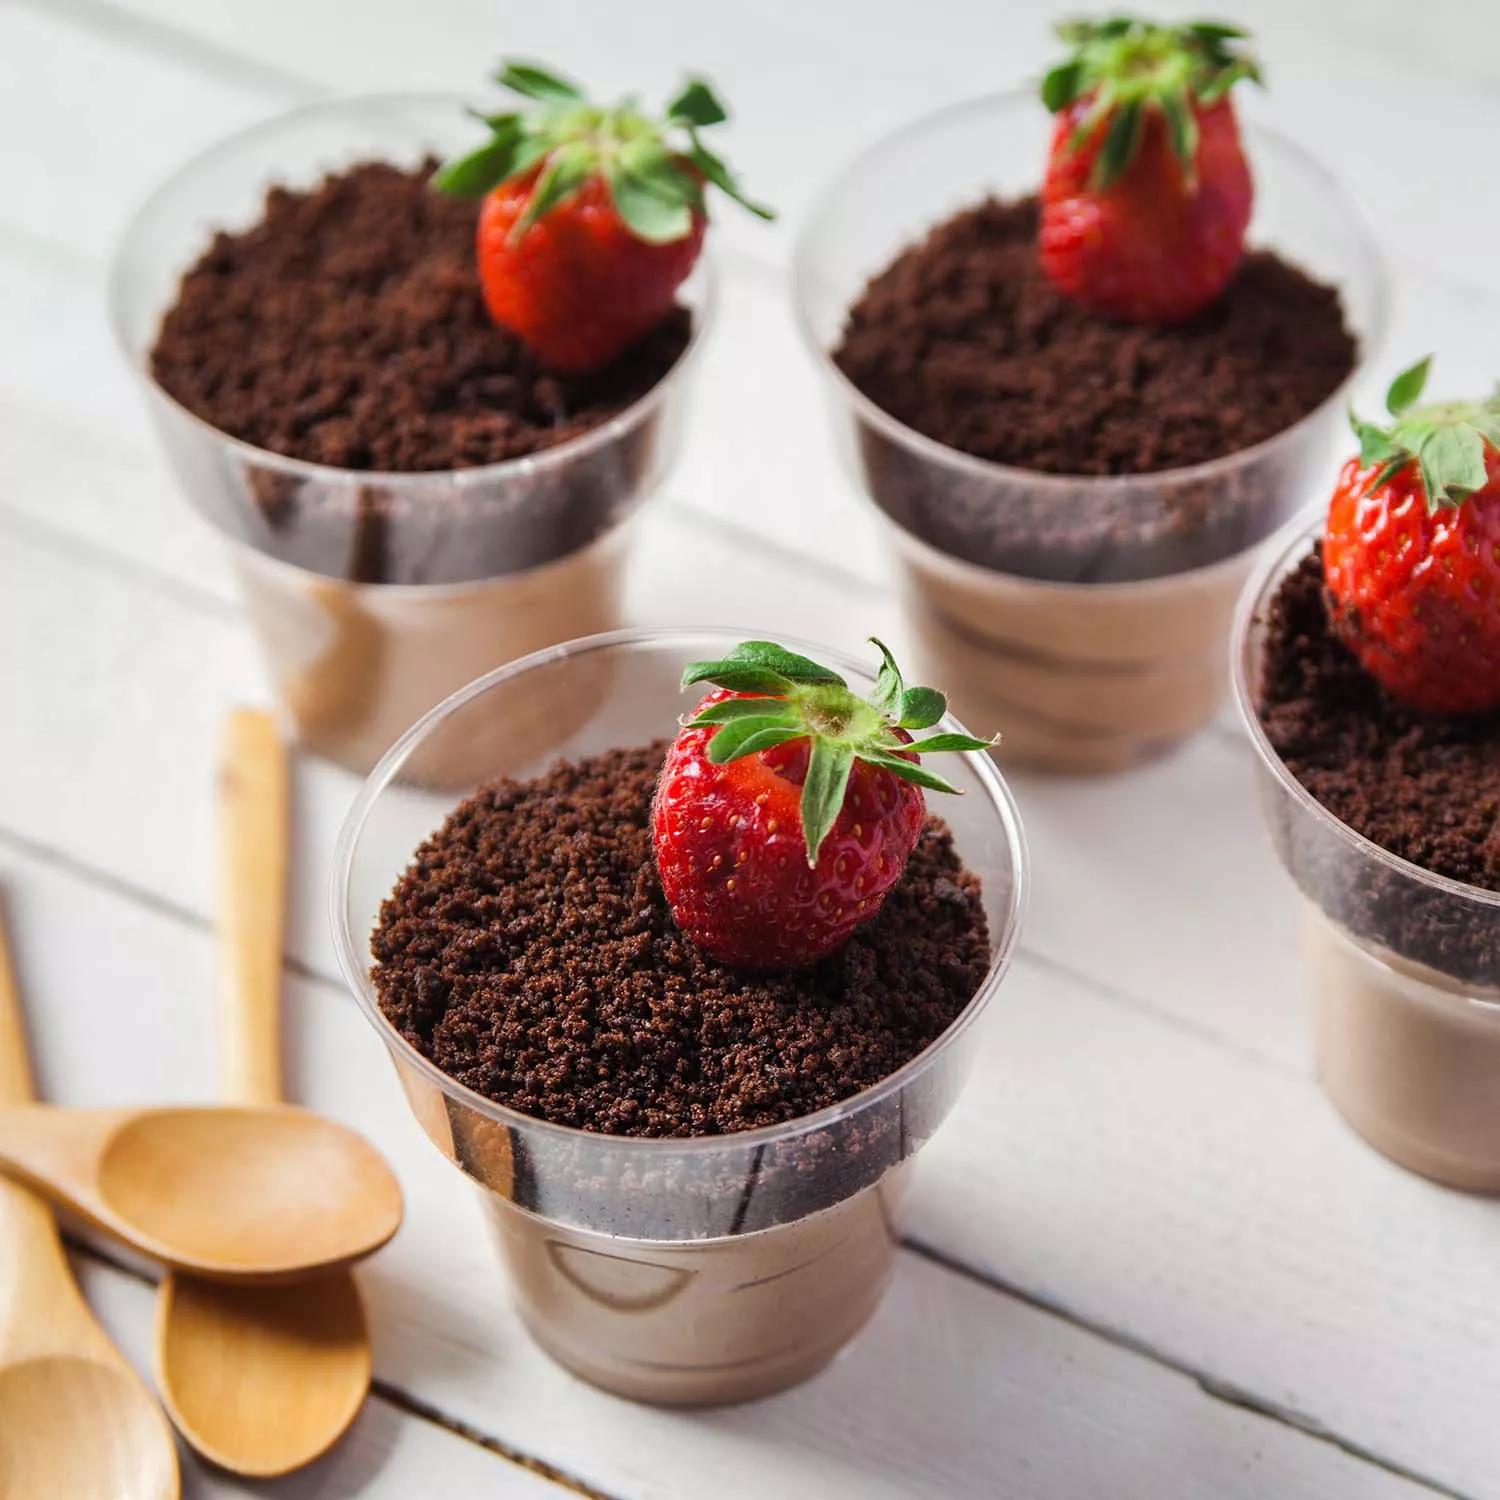 Soil Property Pudding Cups {a.k.a. Dirt Pudding Cups}